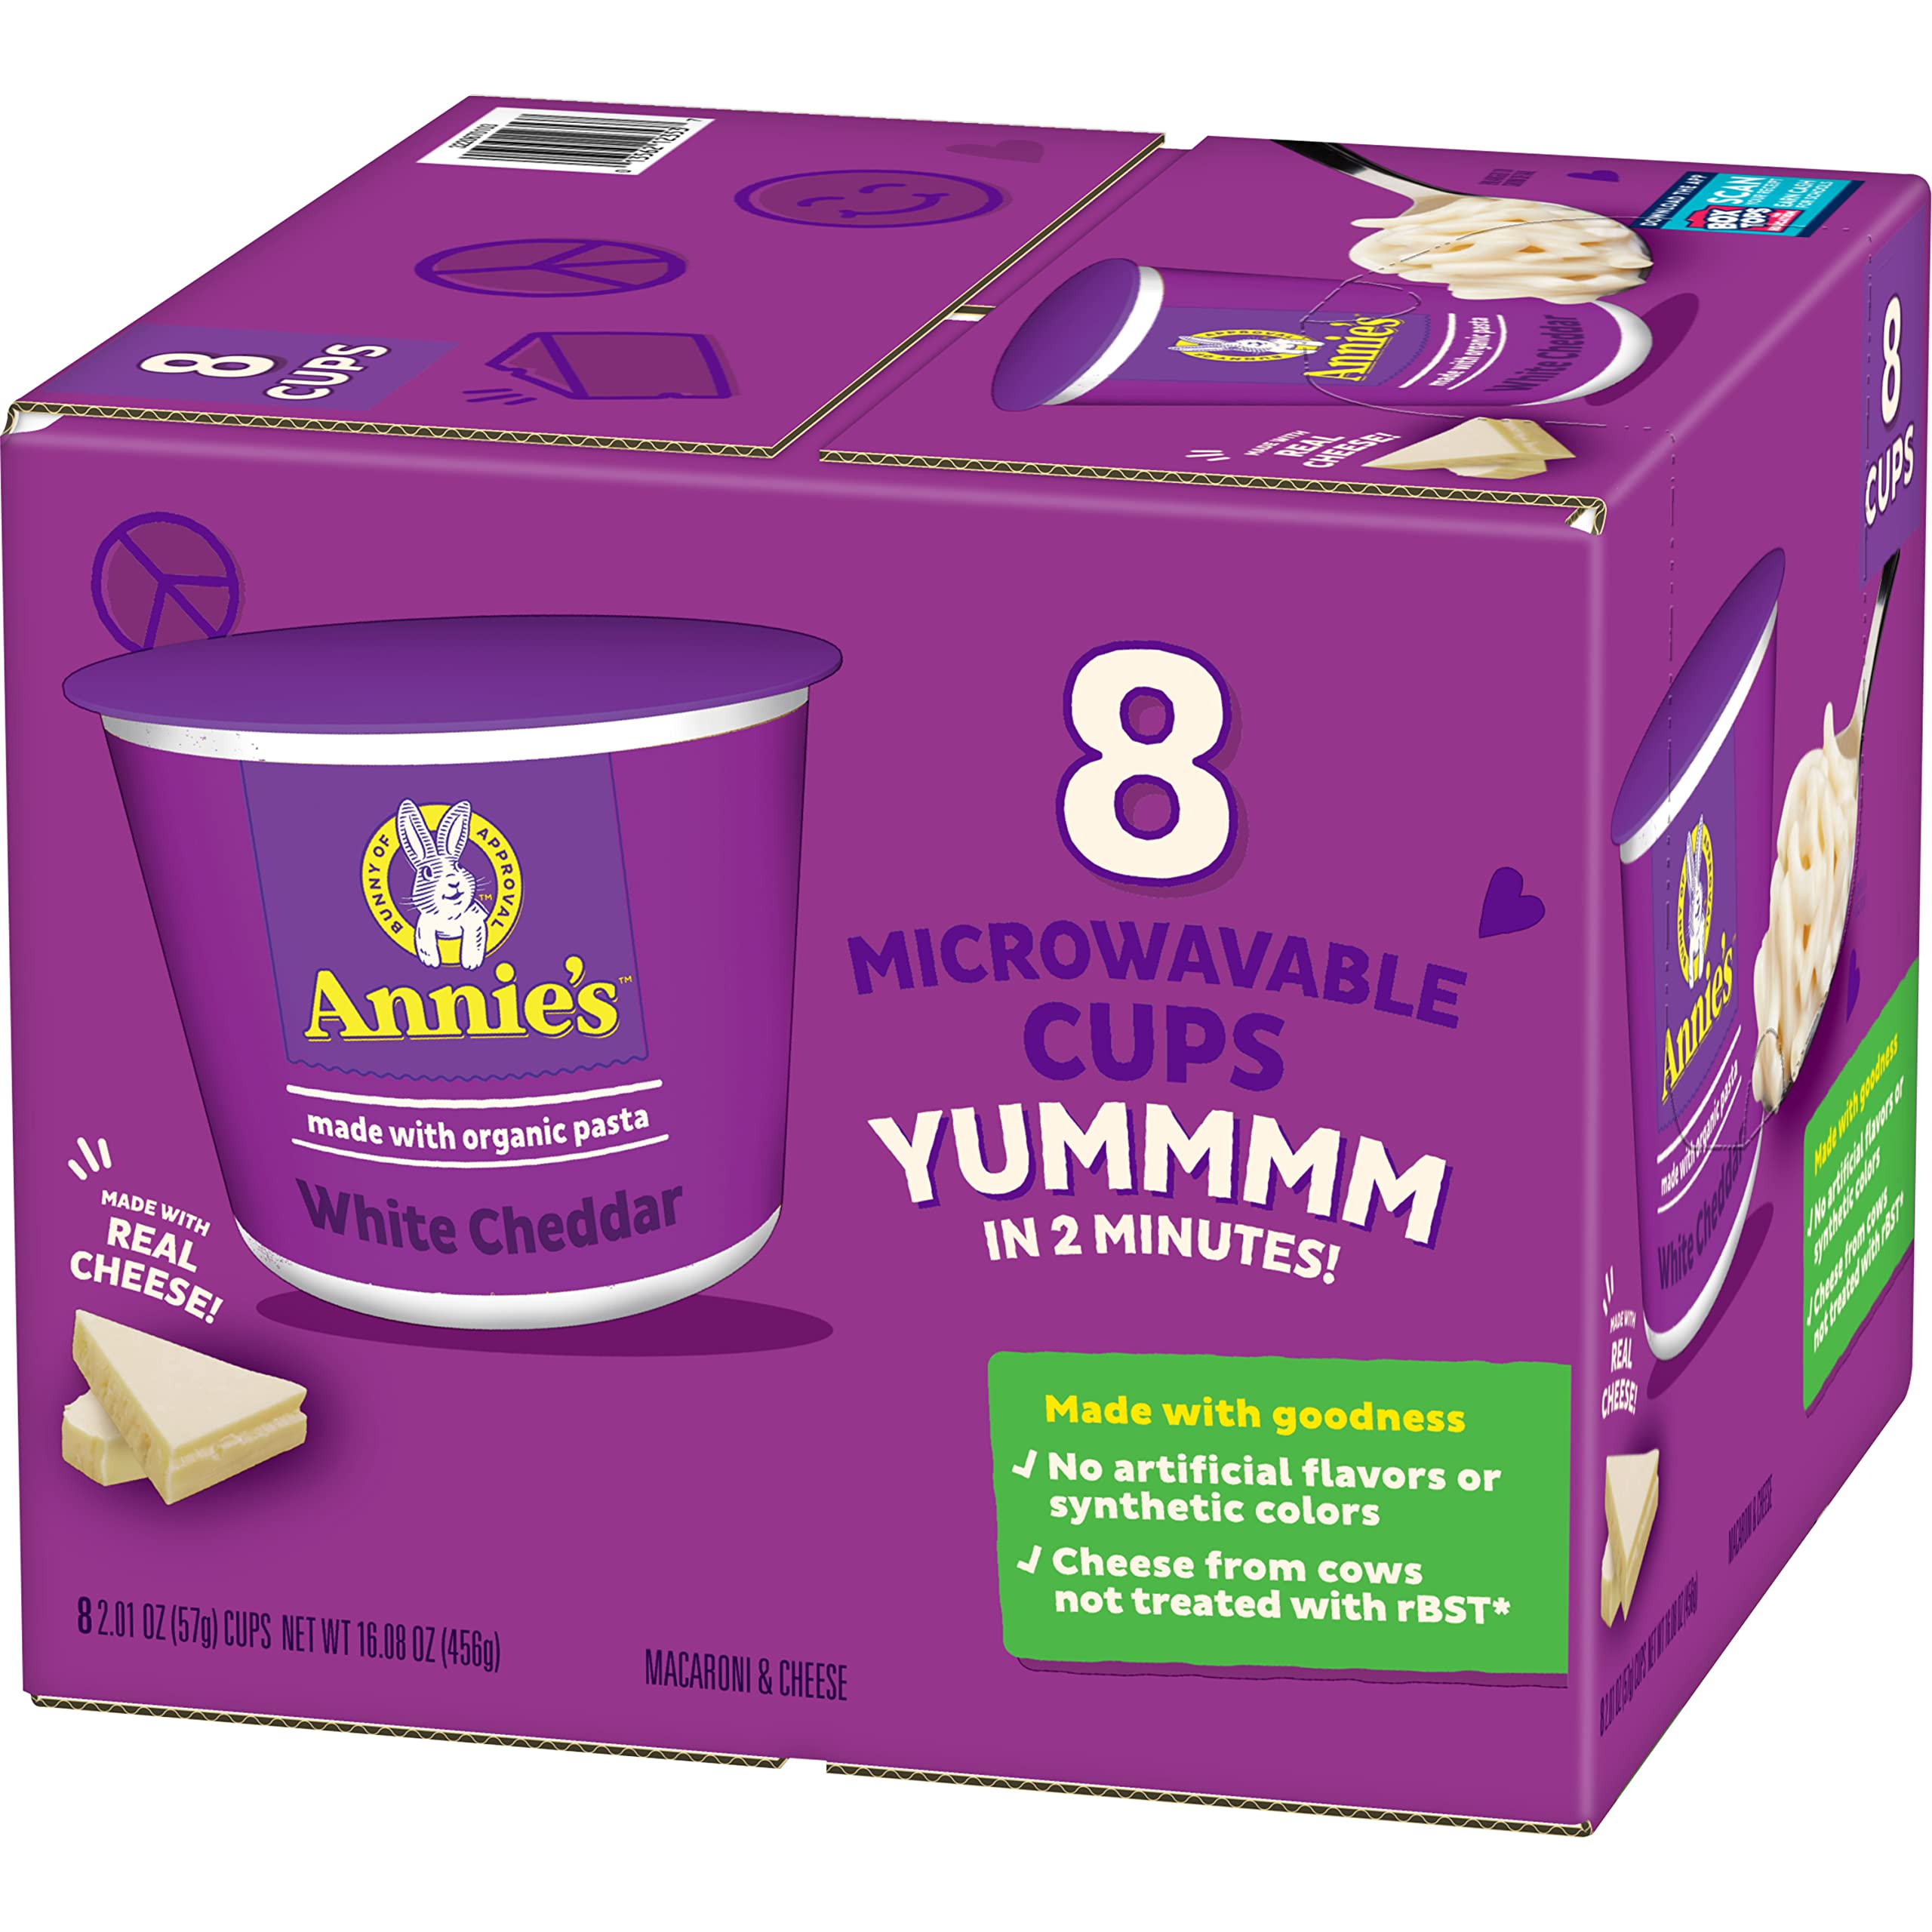 8-Count 2.01-Oz Annie's White Cheddar Mac & Cheese Cups $7.35 (.92c Ea) w/ S&S + Free Shipping w/ Prime or on orders over $35